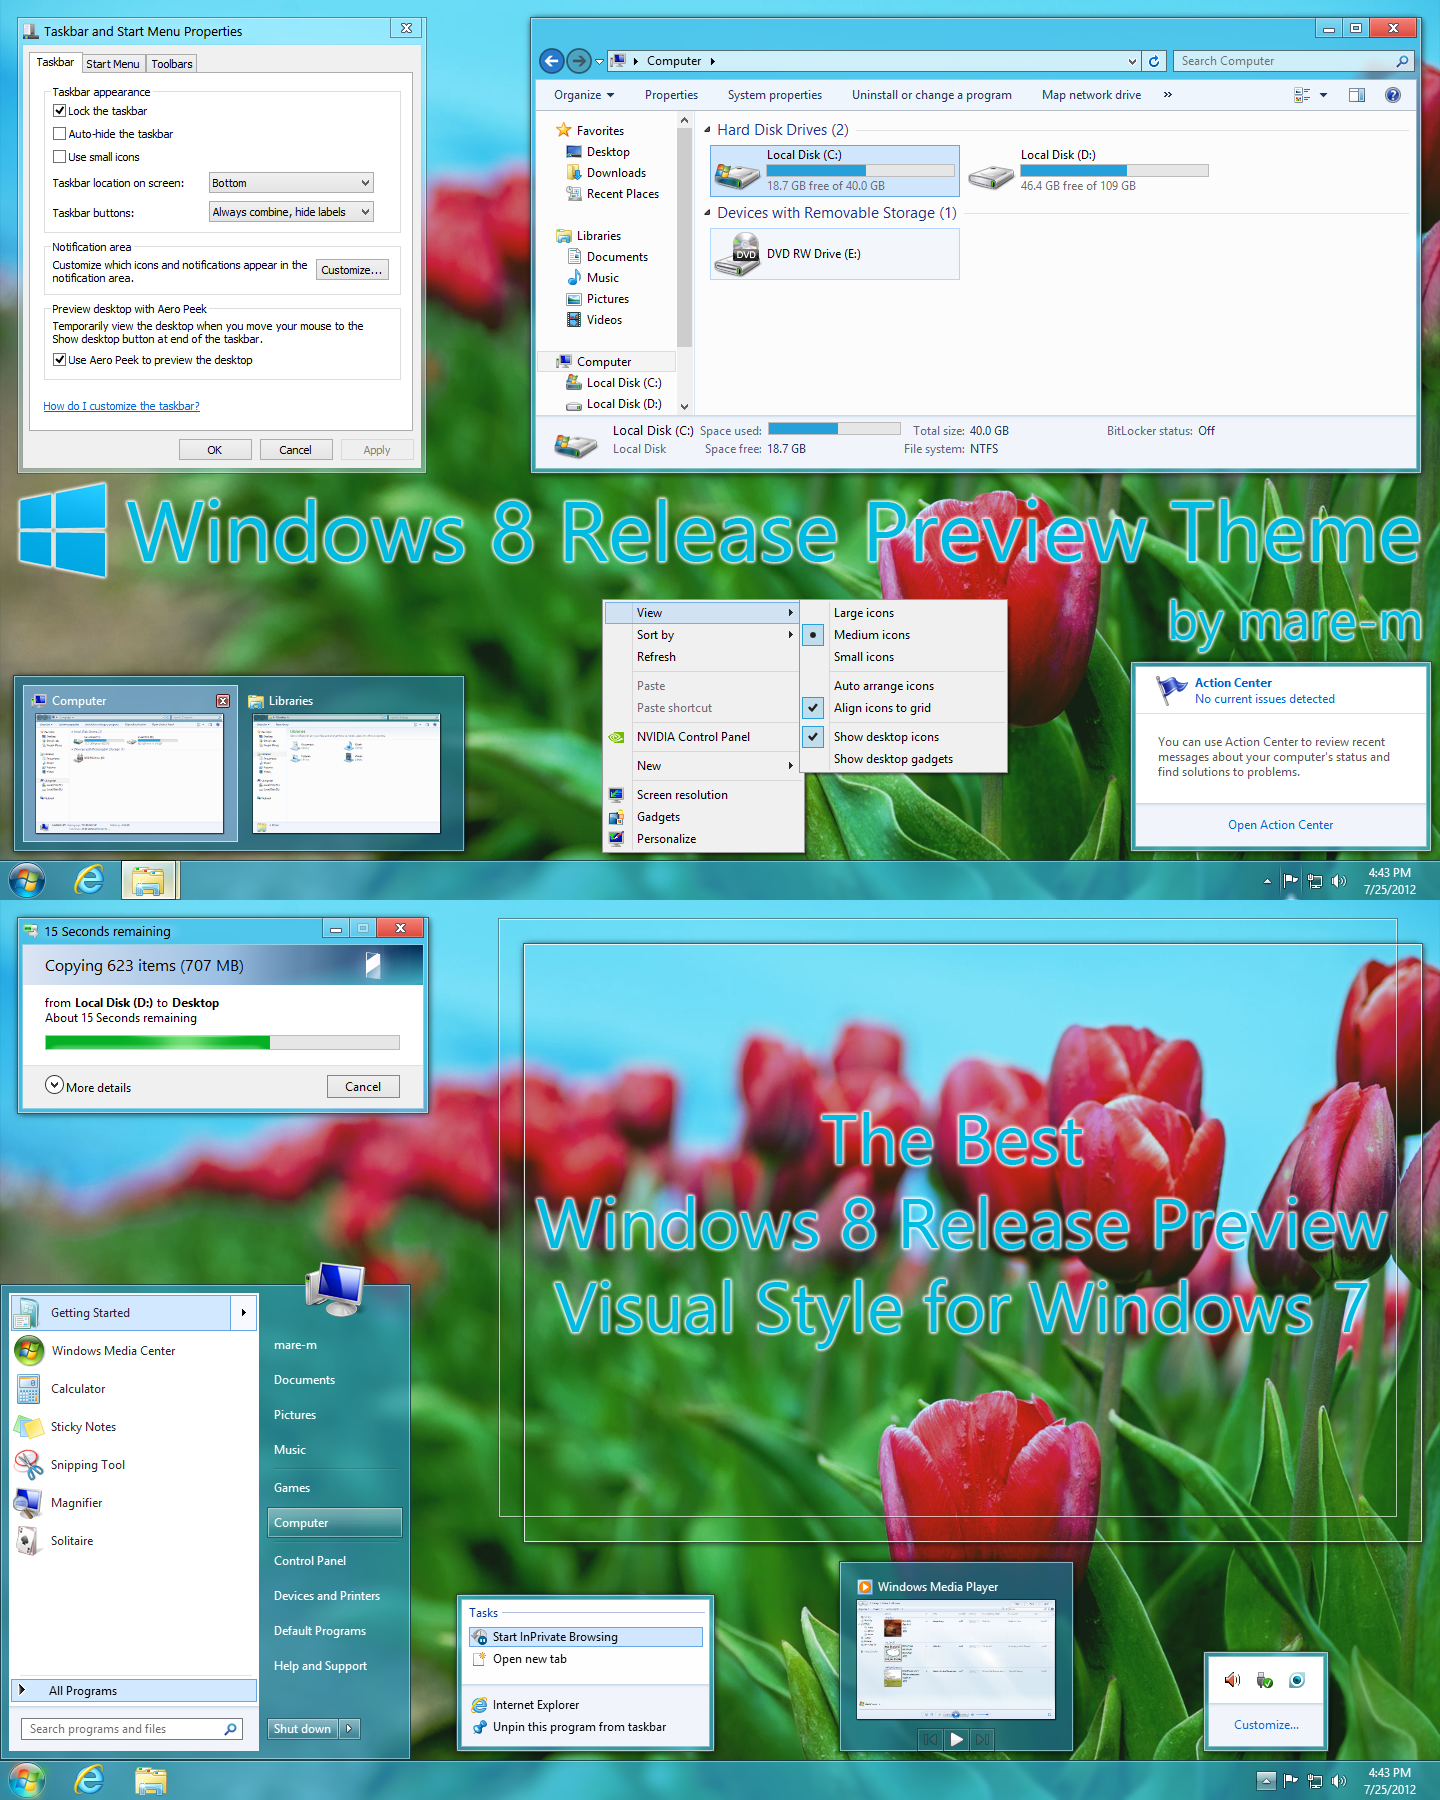 Windows 8 Release Preview Theme for Windows 7 by mare m 1440x1800